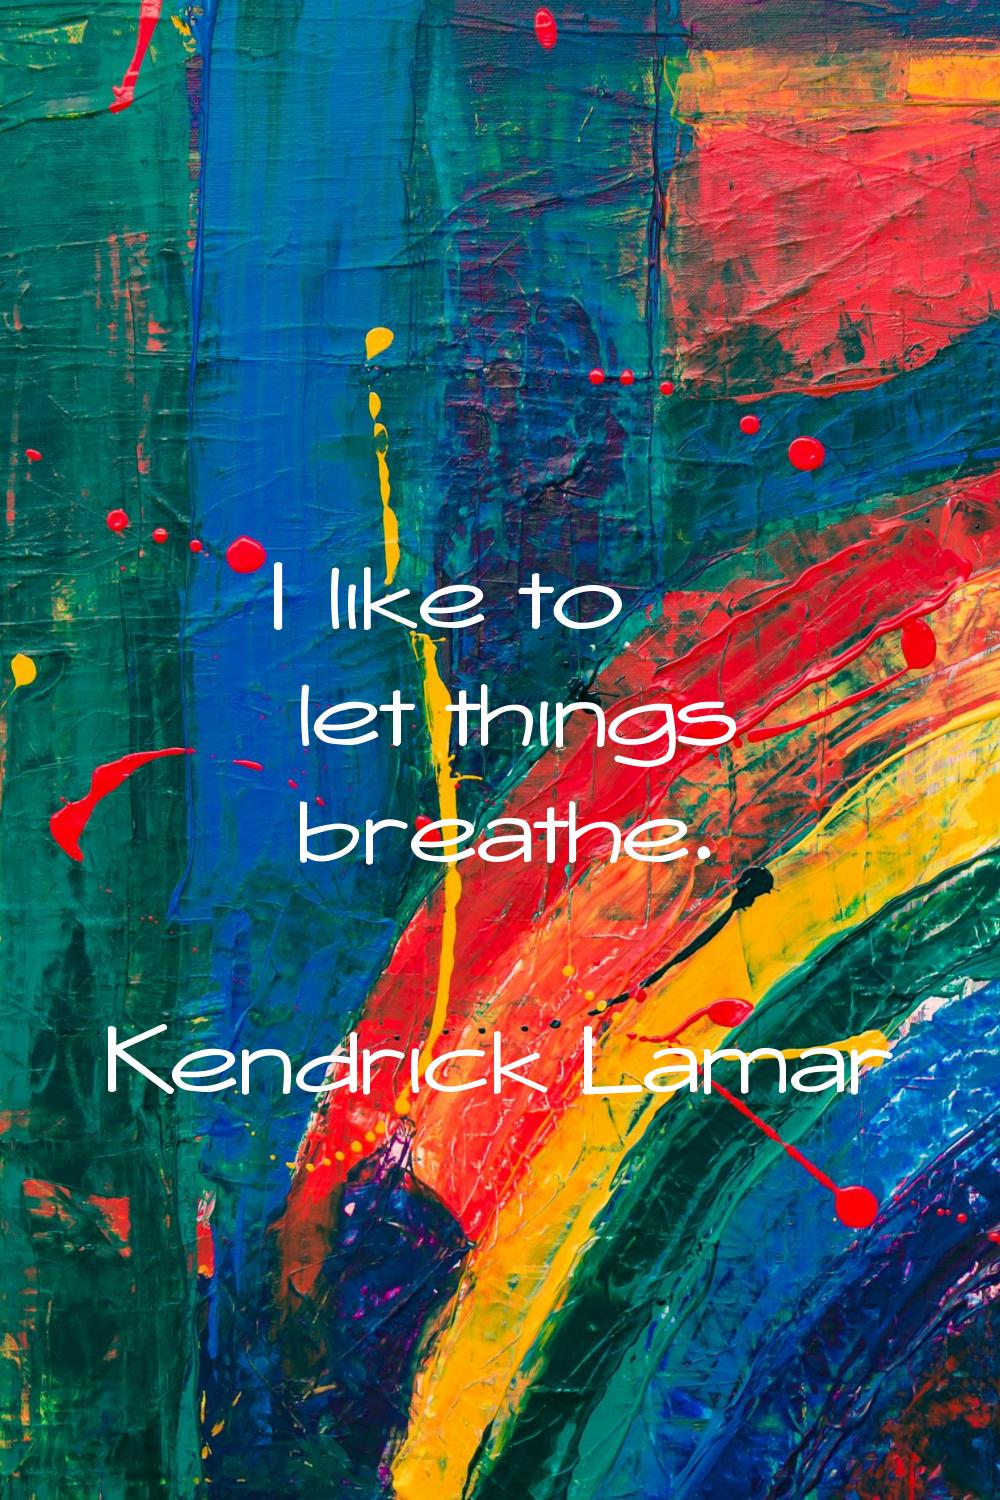 I like to let things breathe.